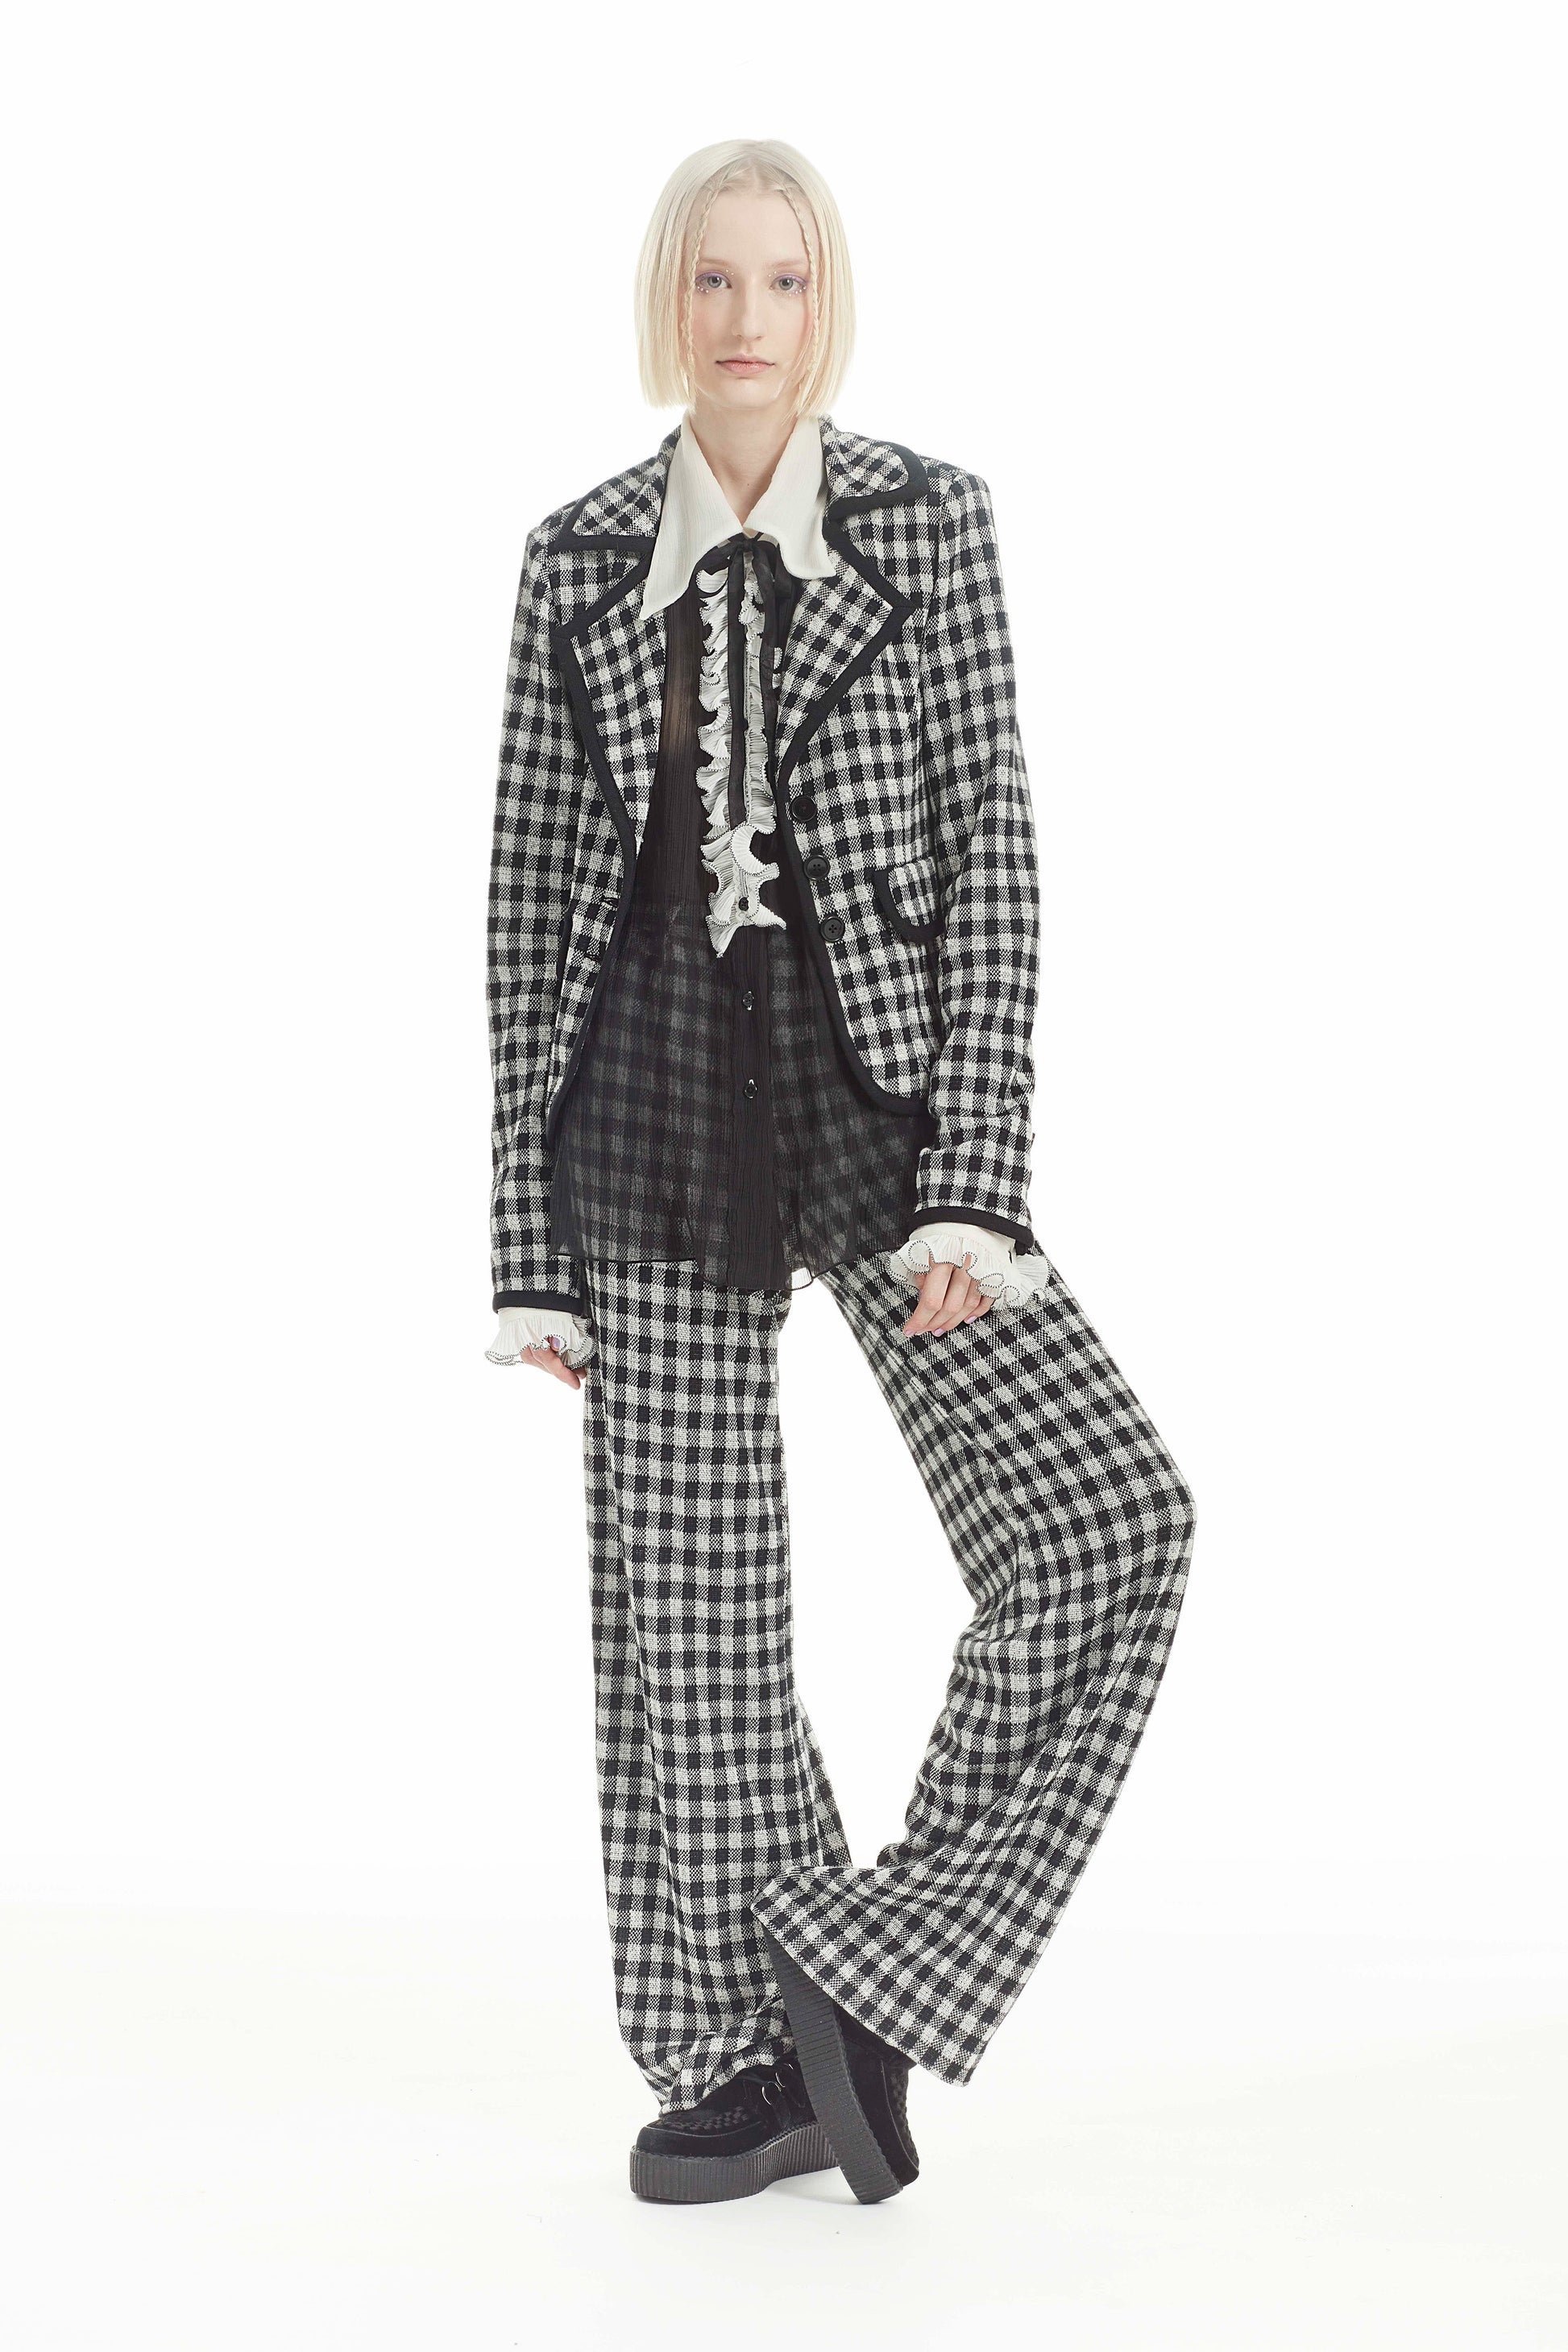 Gingham Blazer Black a perfect pair with Gingham Pants Black accentuate and enhance your curves